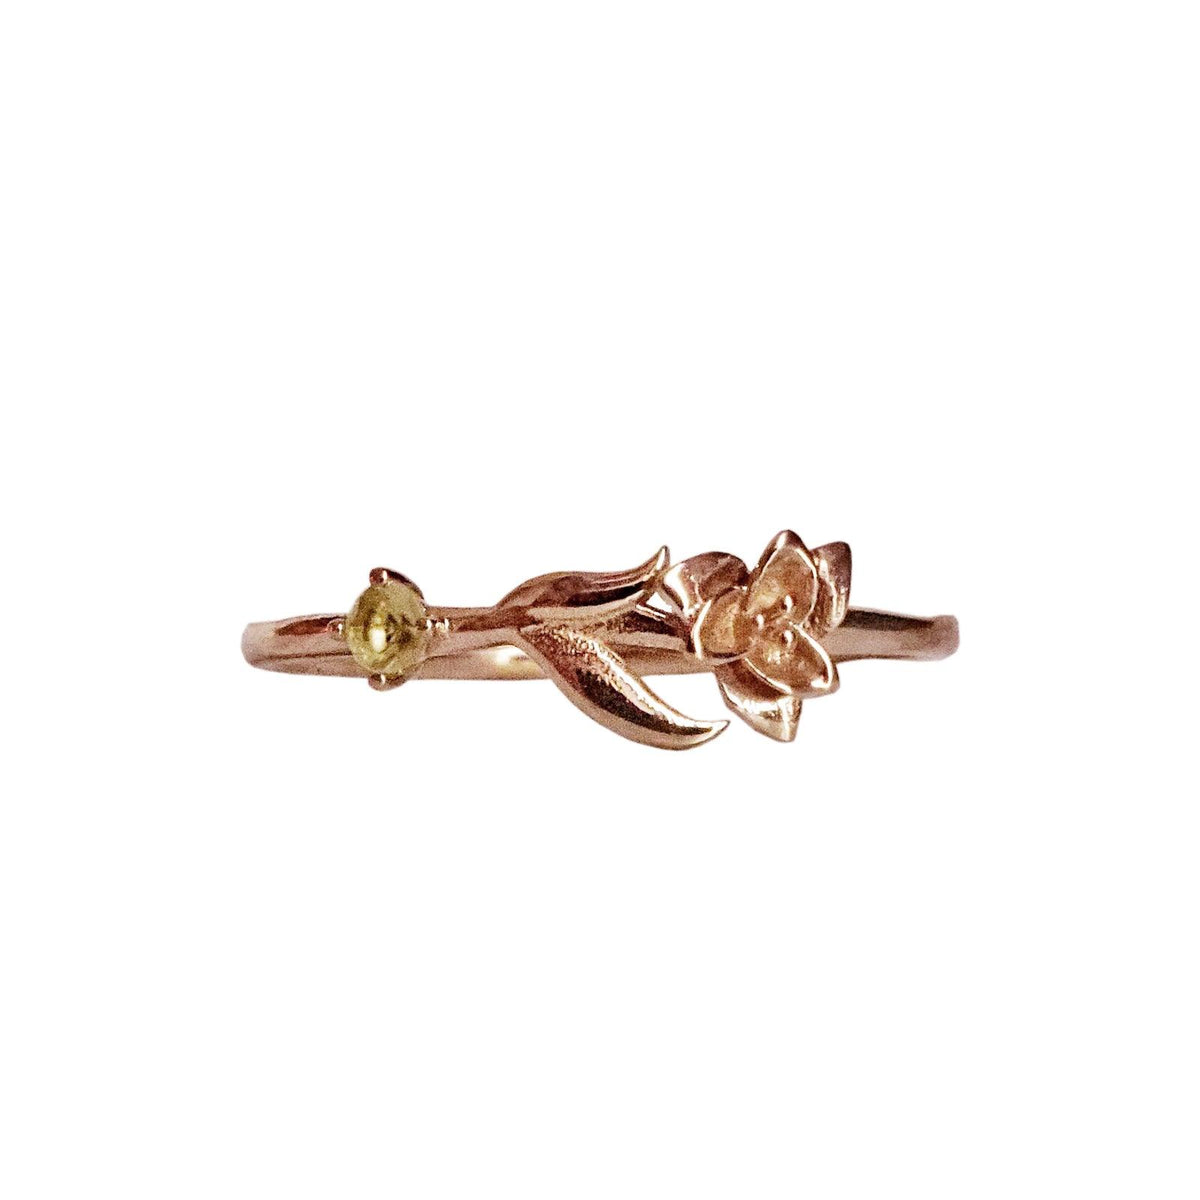 August Birth Flower Ring in rose gold